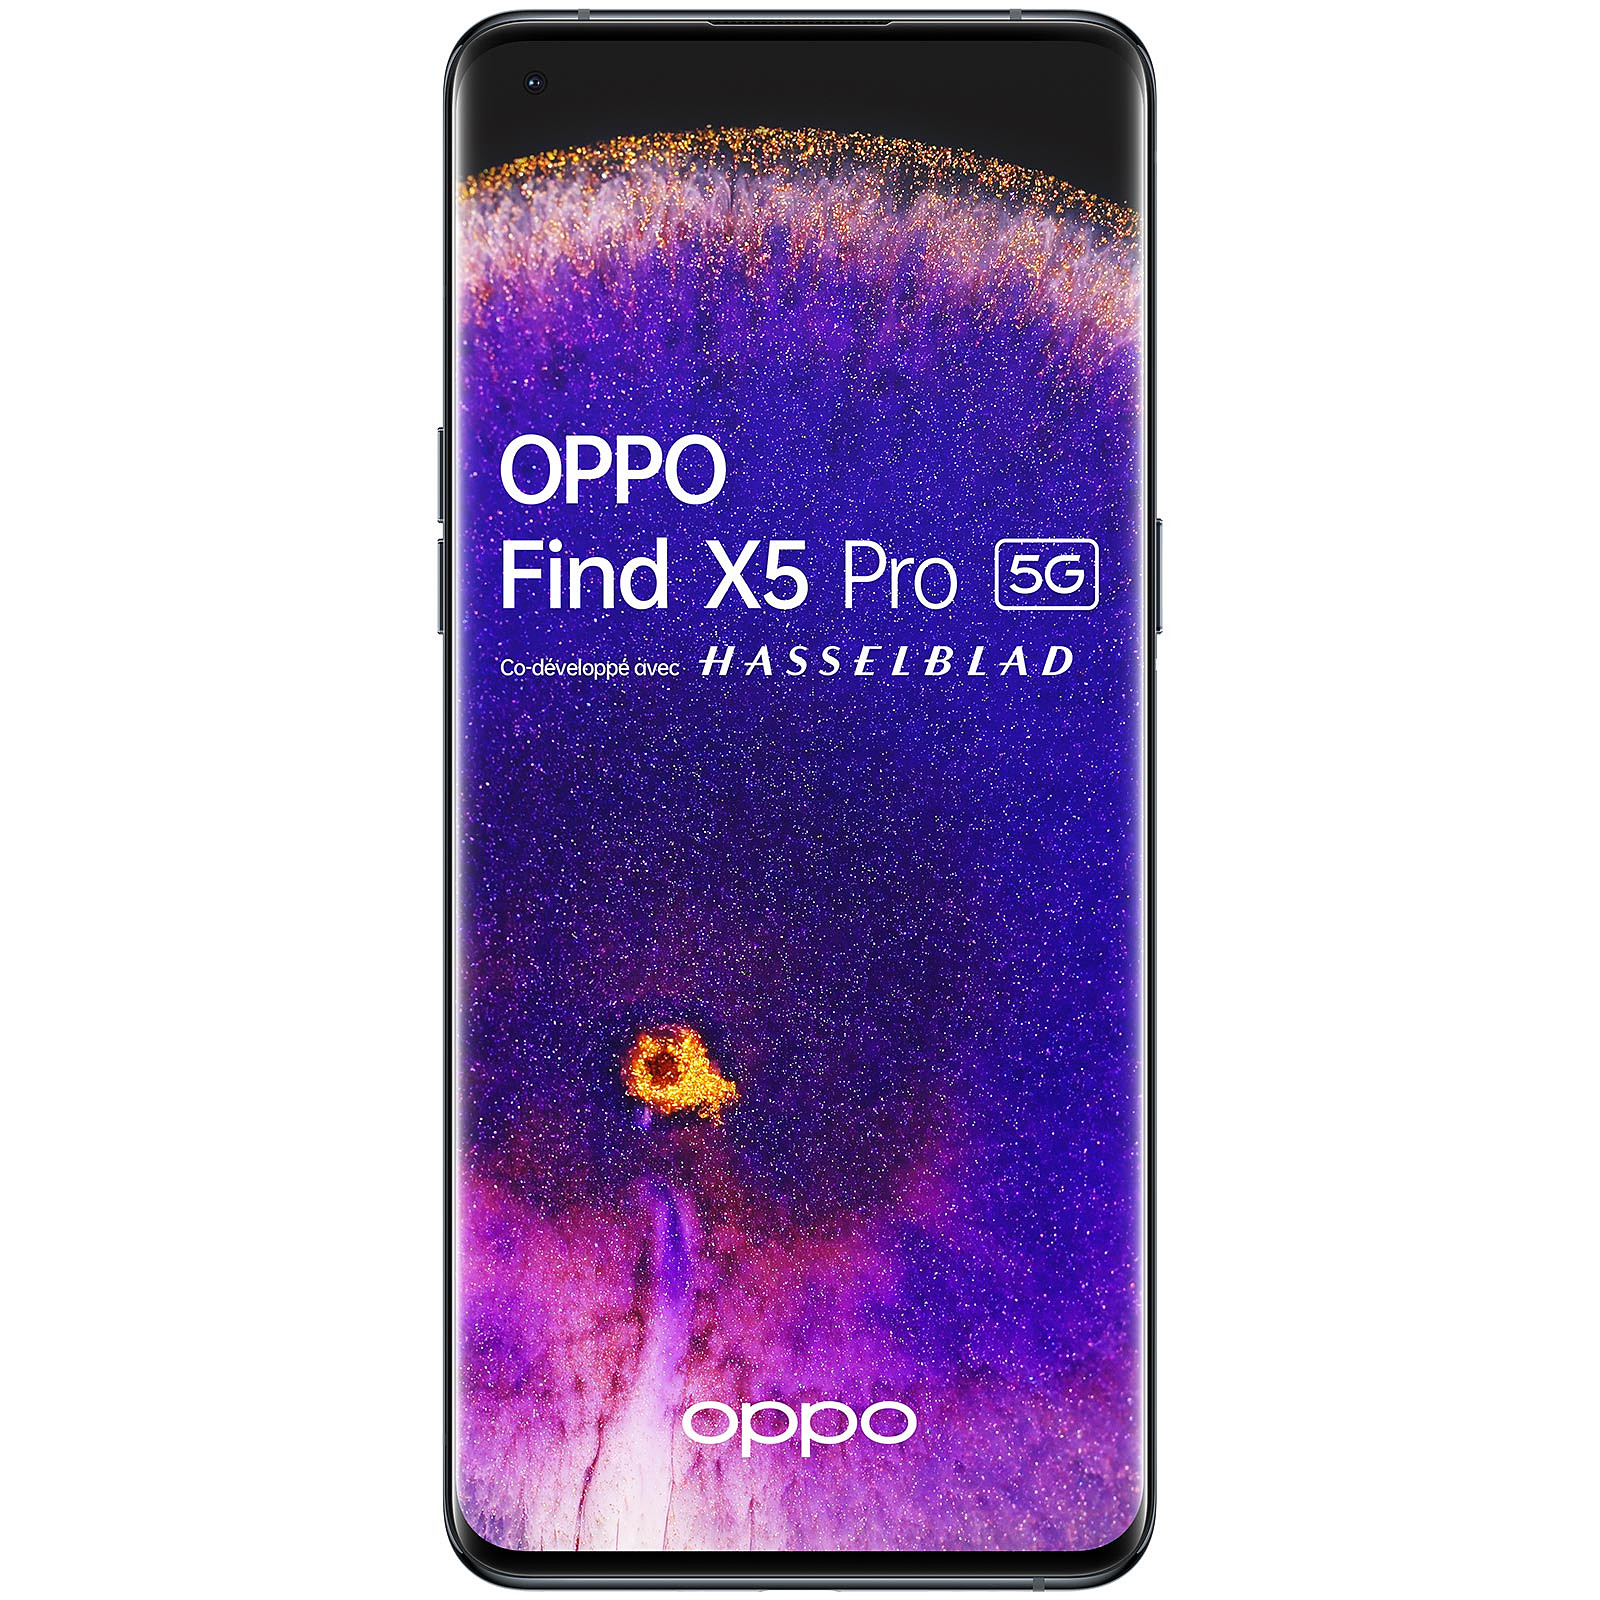 OPPO Find X5 Pro 5G Noir Glace - Mobile & smartphone OPPO